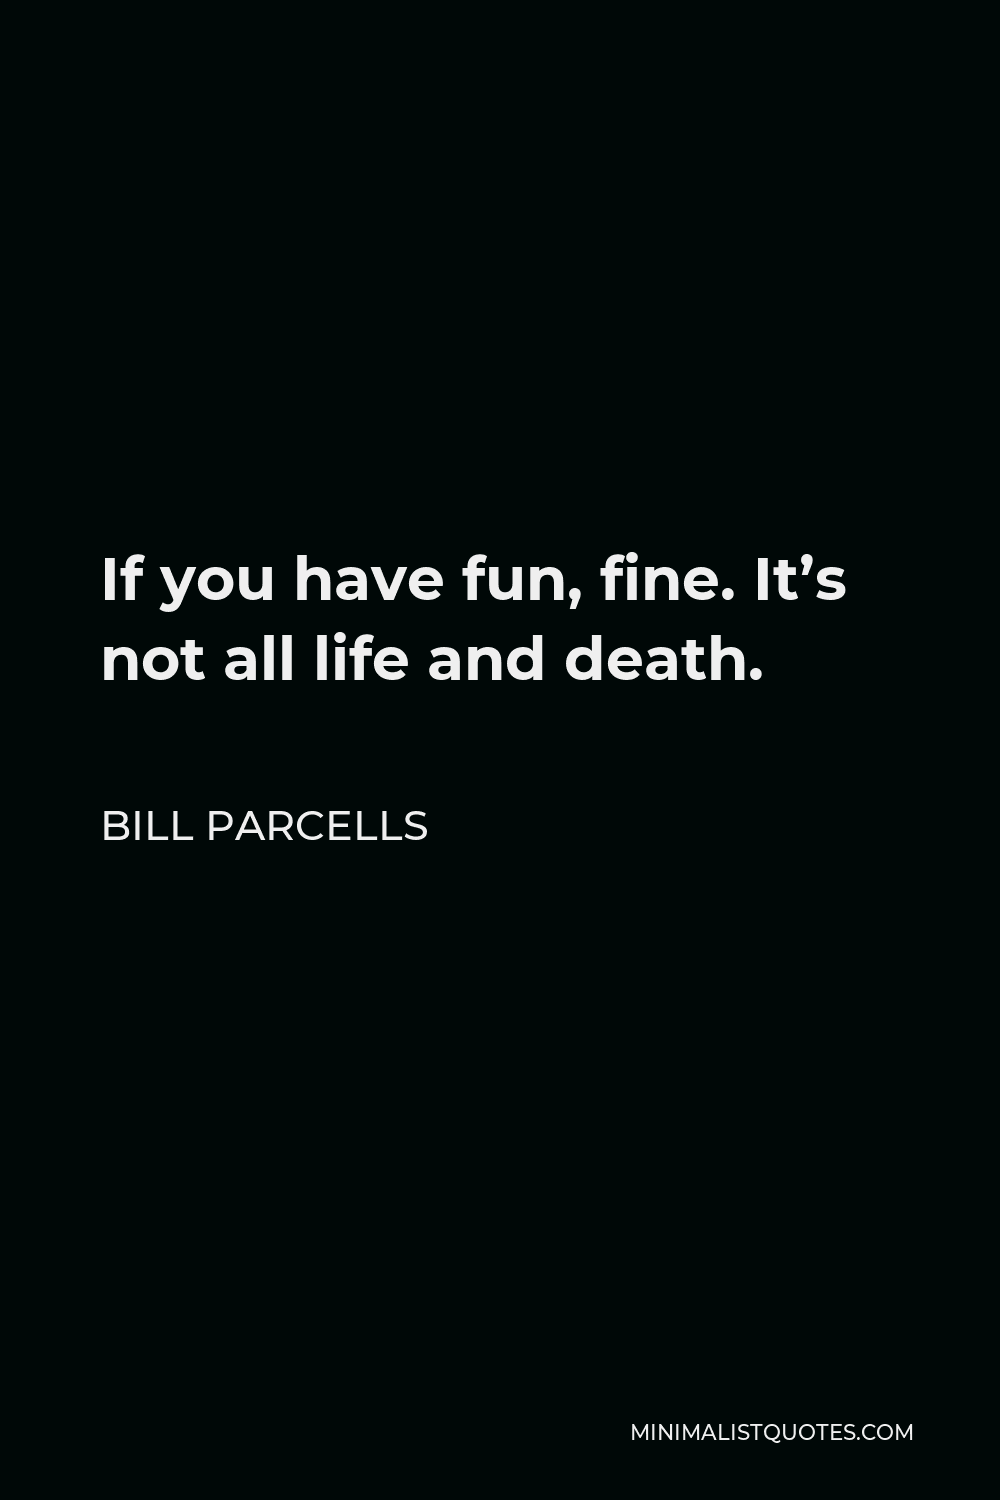 Bill Parcells Quote - If you have fun, fine. It’s not all life and death.